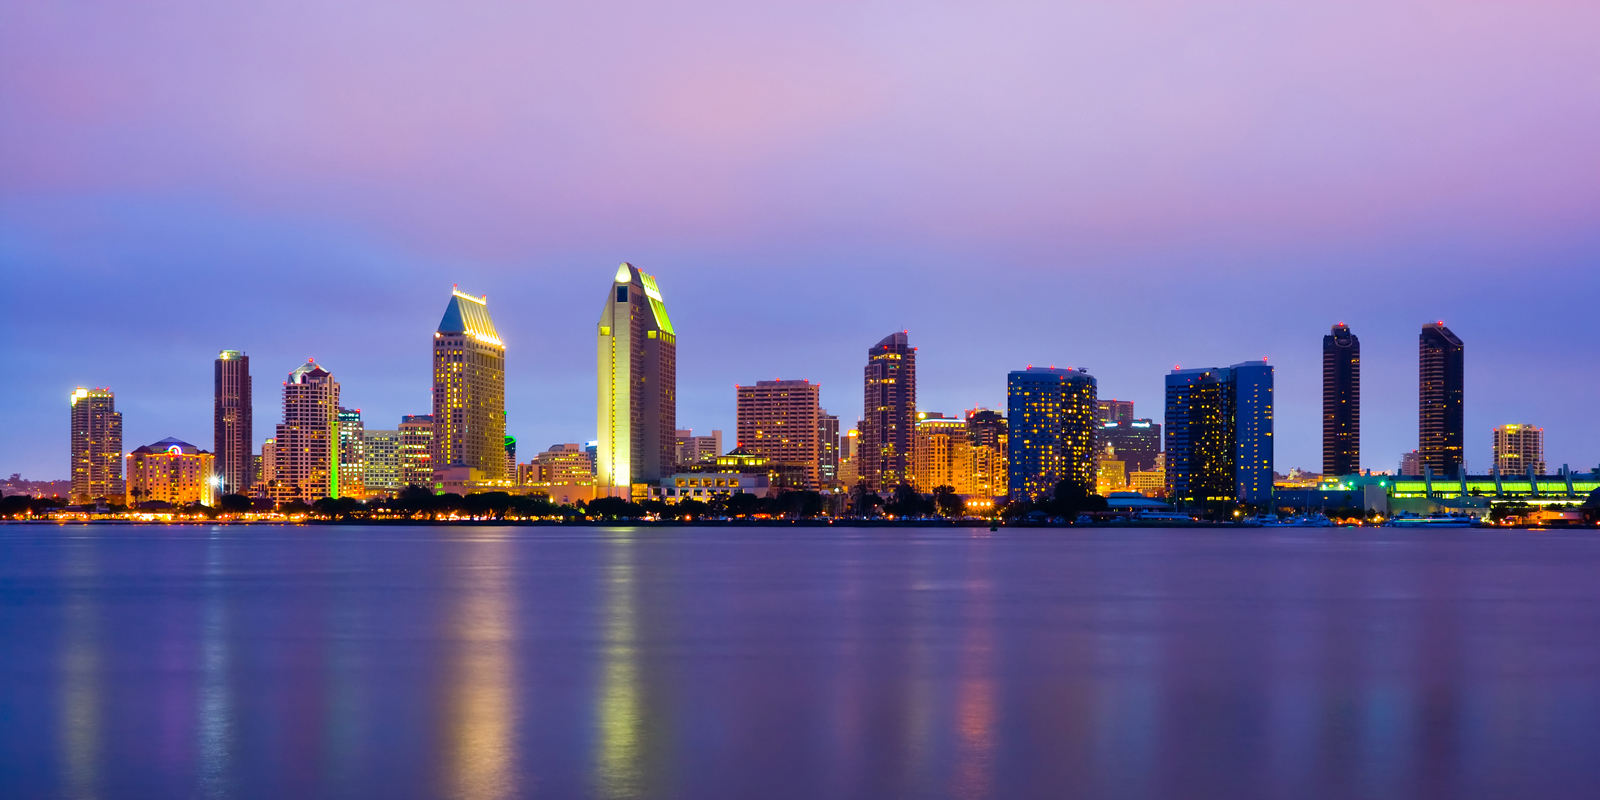 San Diego Hospitality Industry Faces Labor Shortages